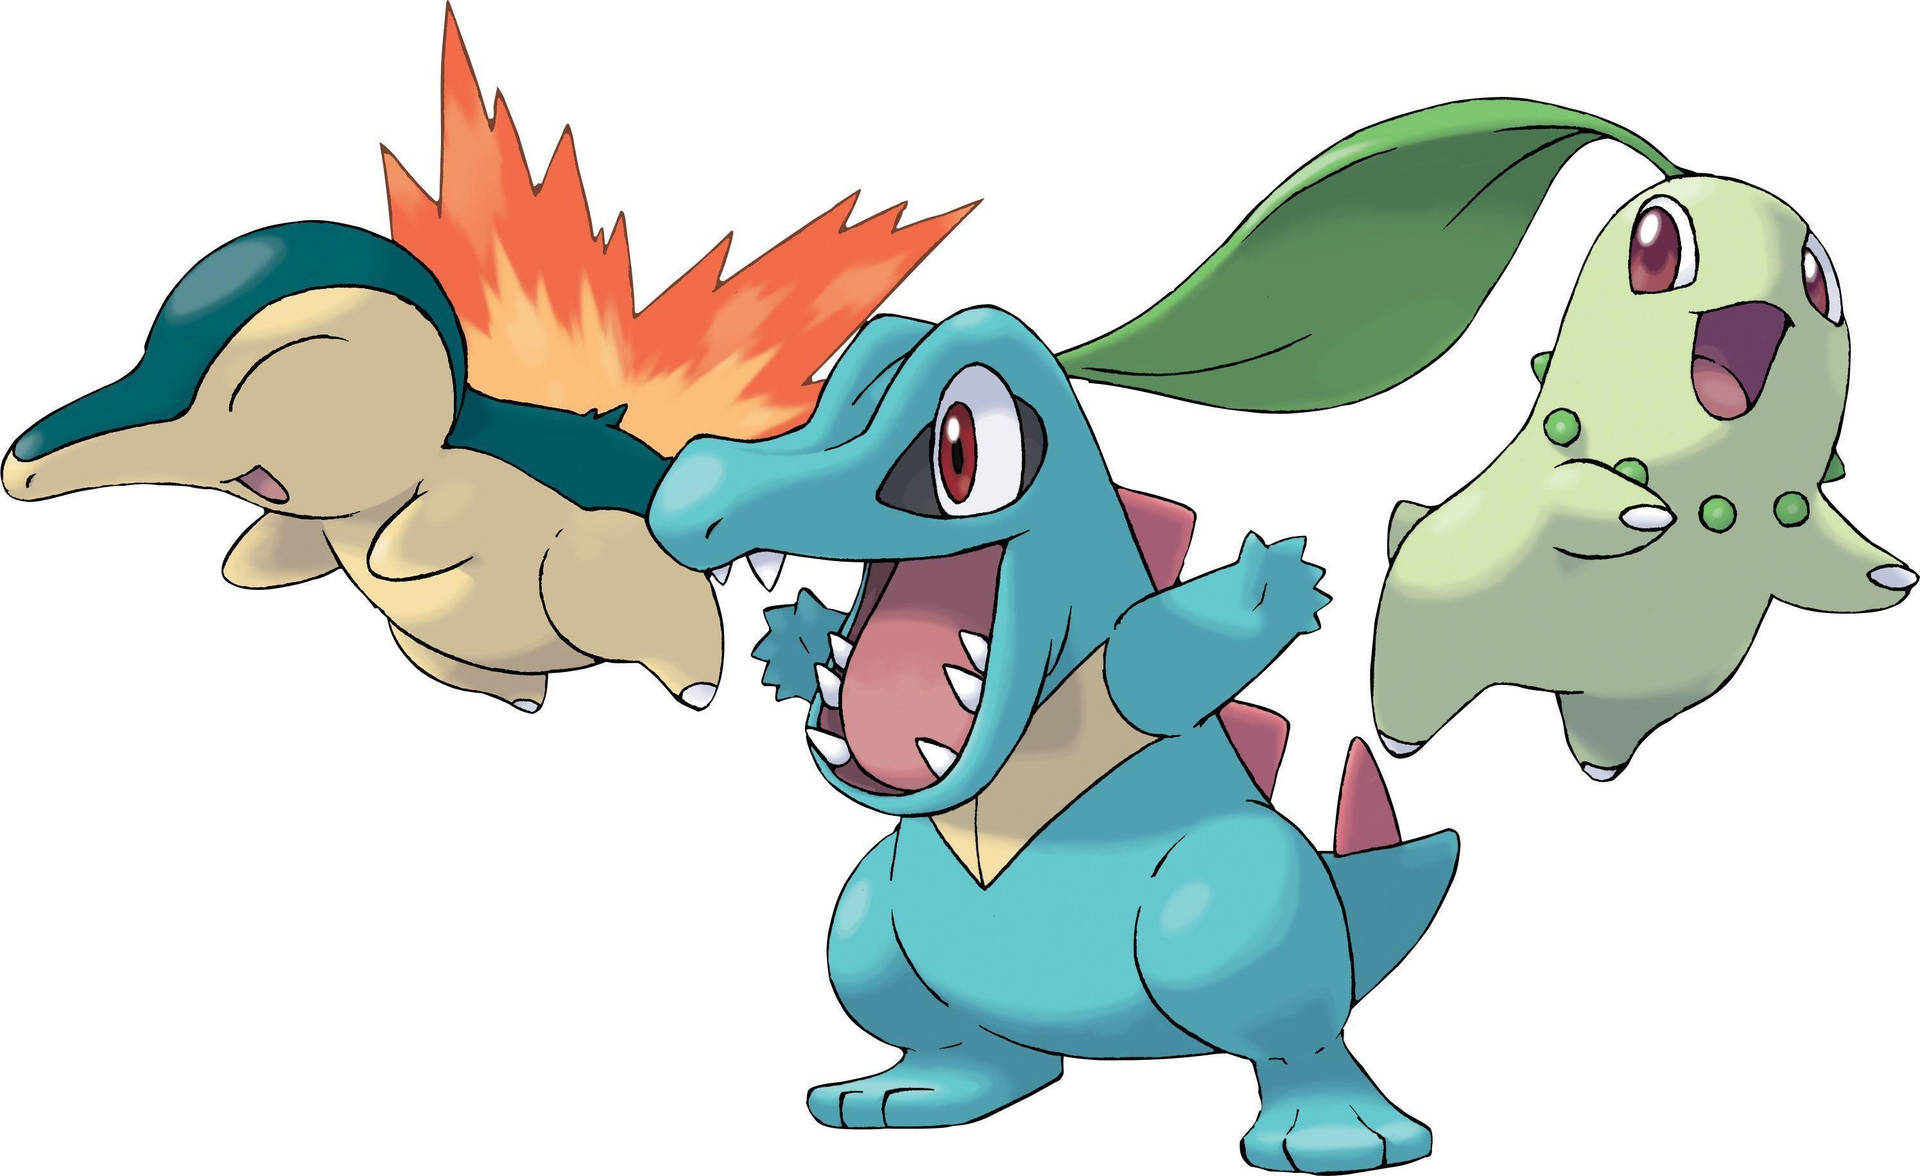 Cyndaquil, Totodile And Chikorita In White Background Wallpaper